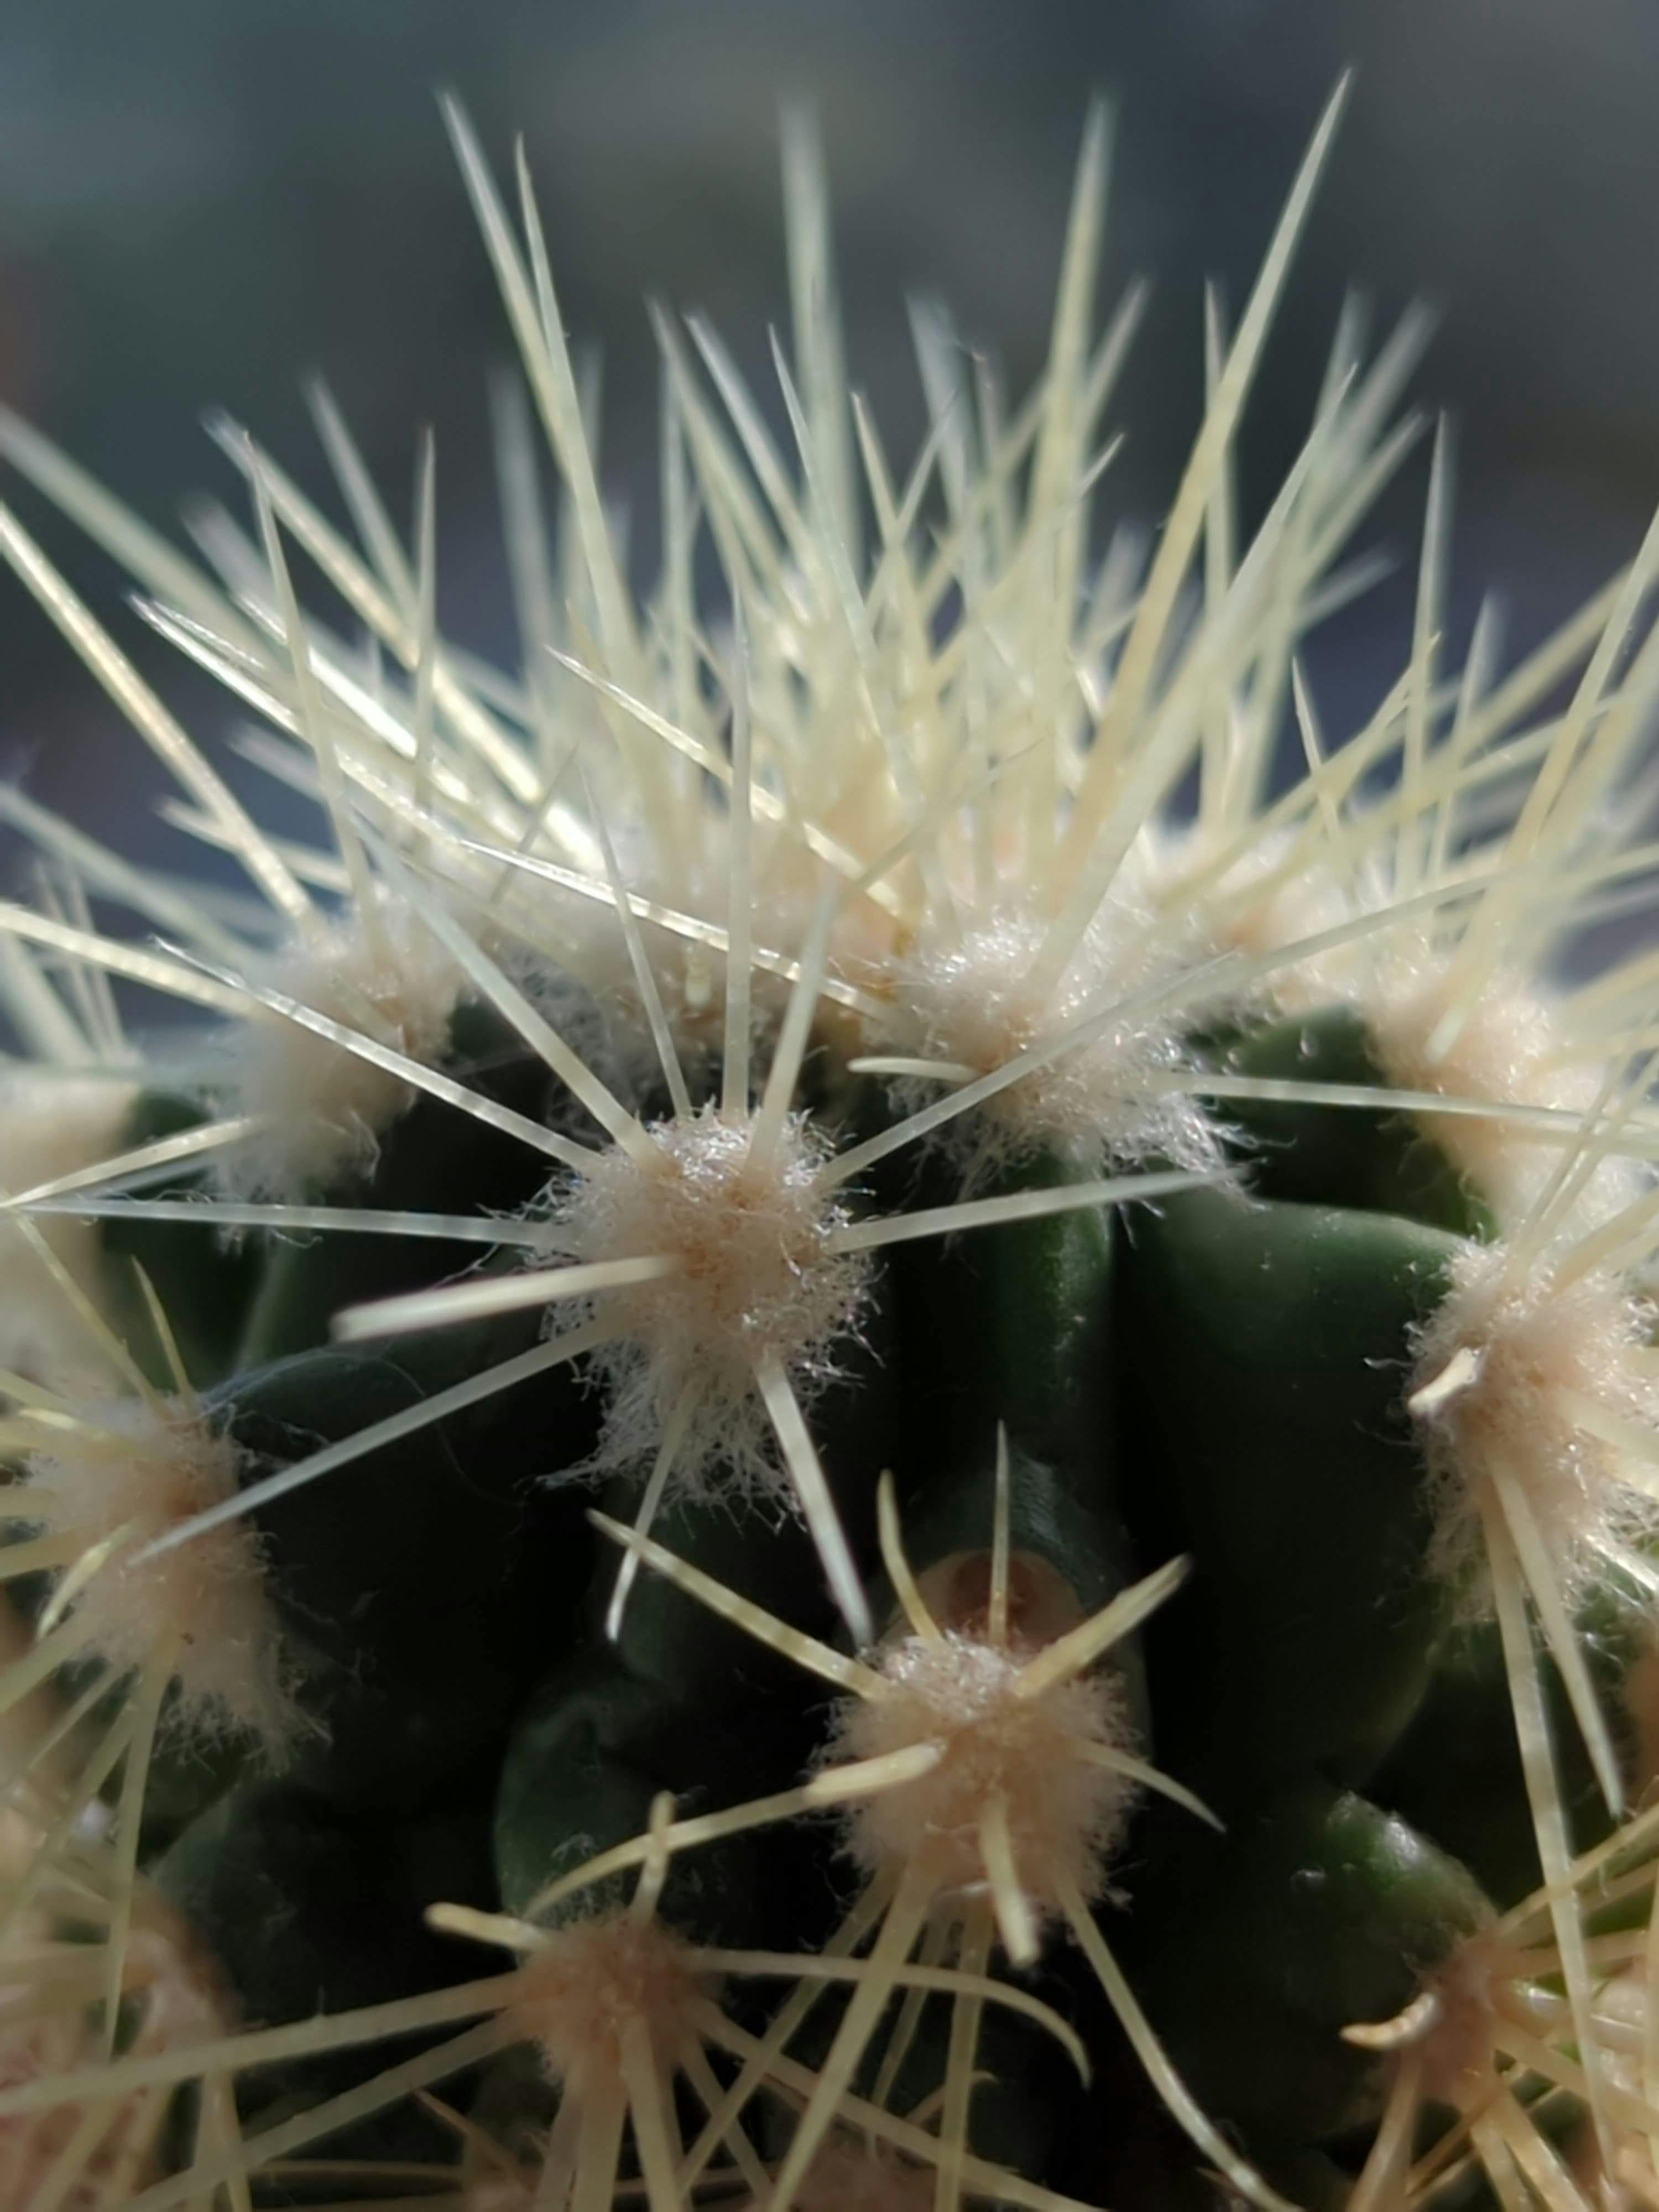 Close up photo of another cactus